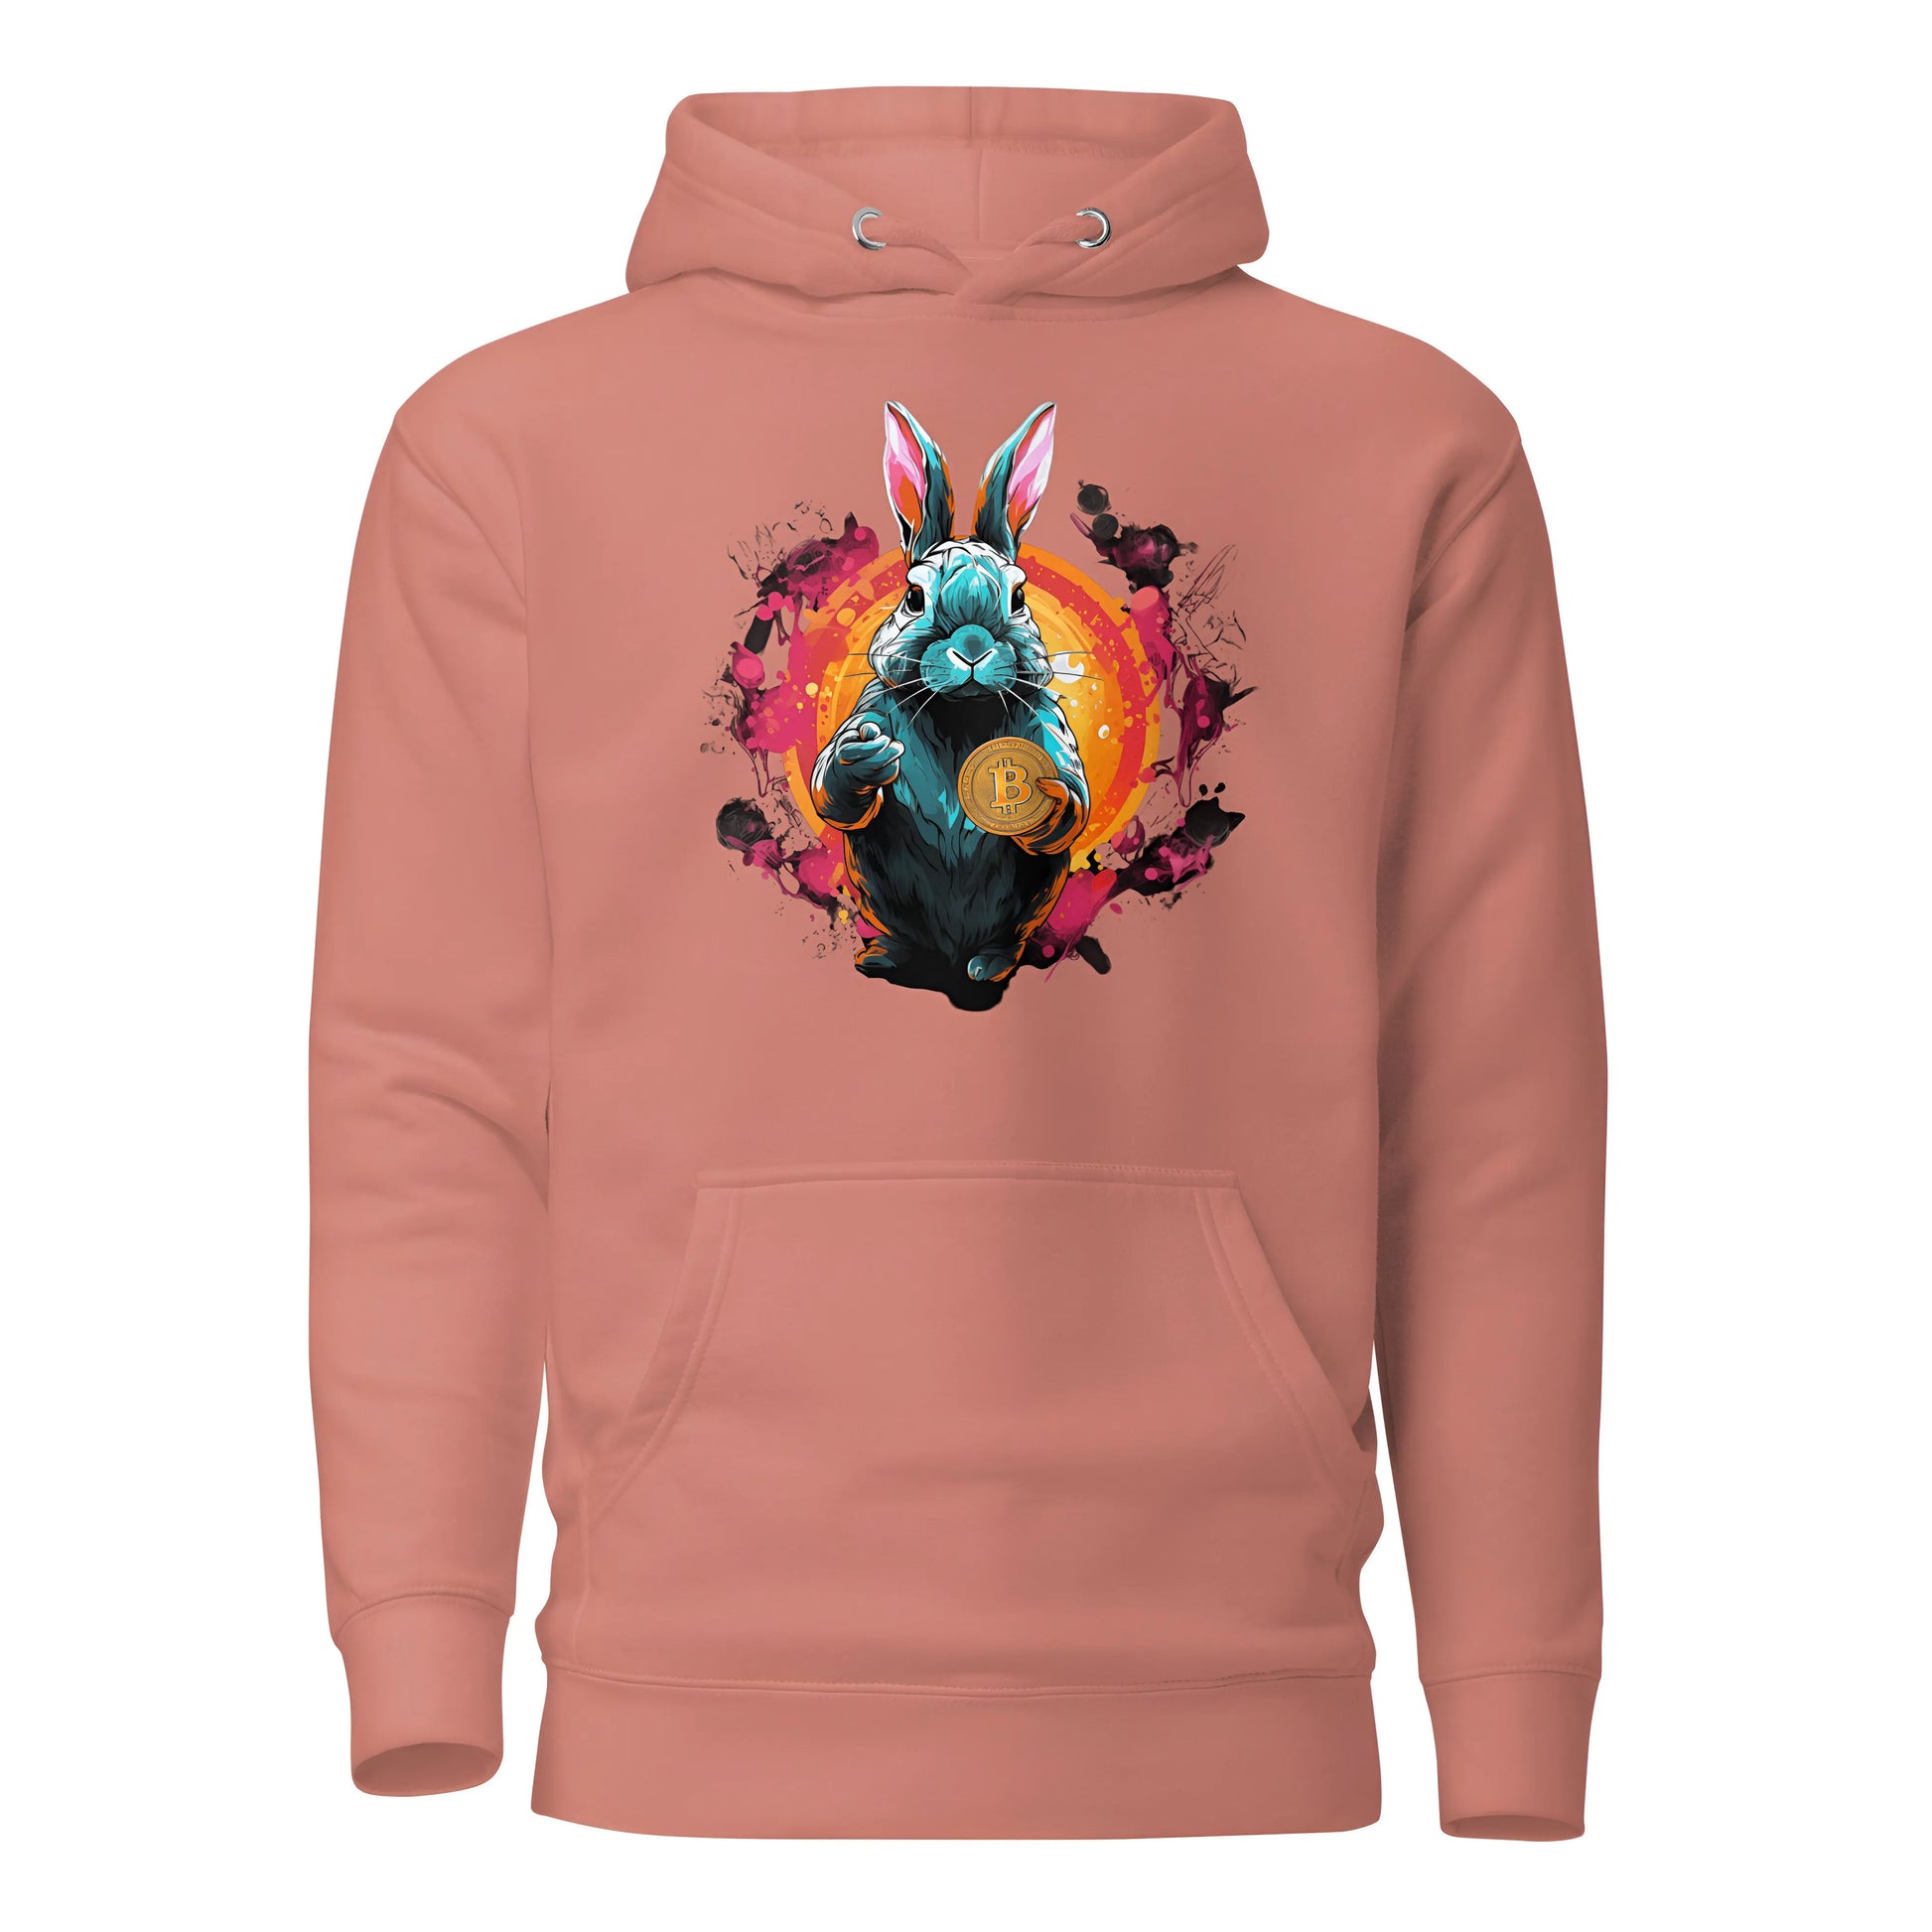 Falling Down The Bitcoin Rabbit Hole - Premium Unisex Bitcoin Hoodie - Join us Too! Dusty RoseColor